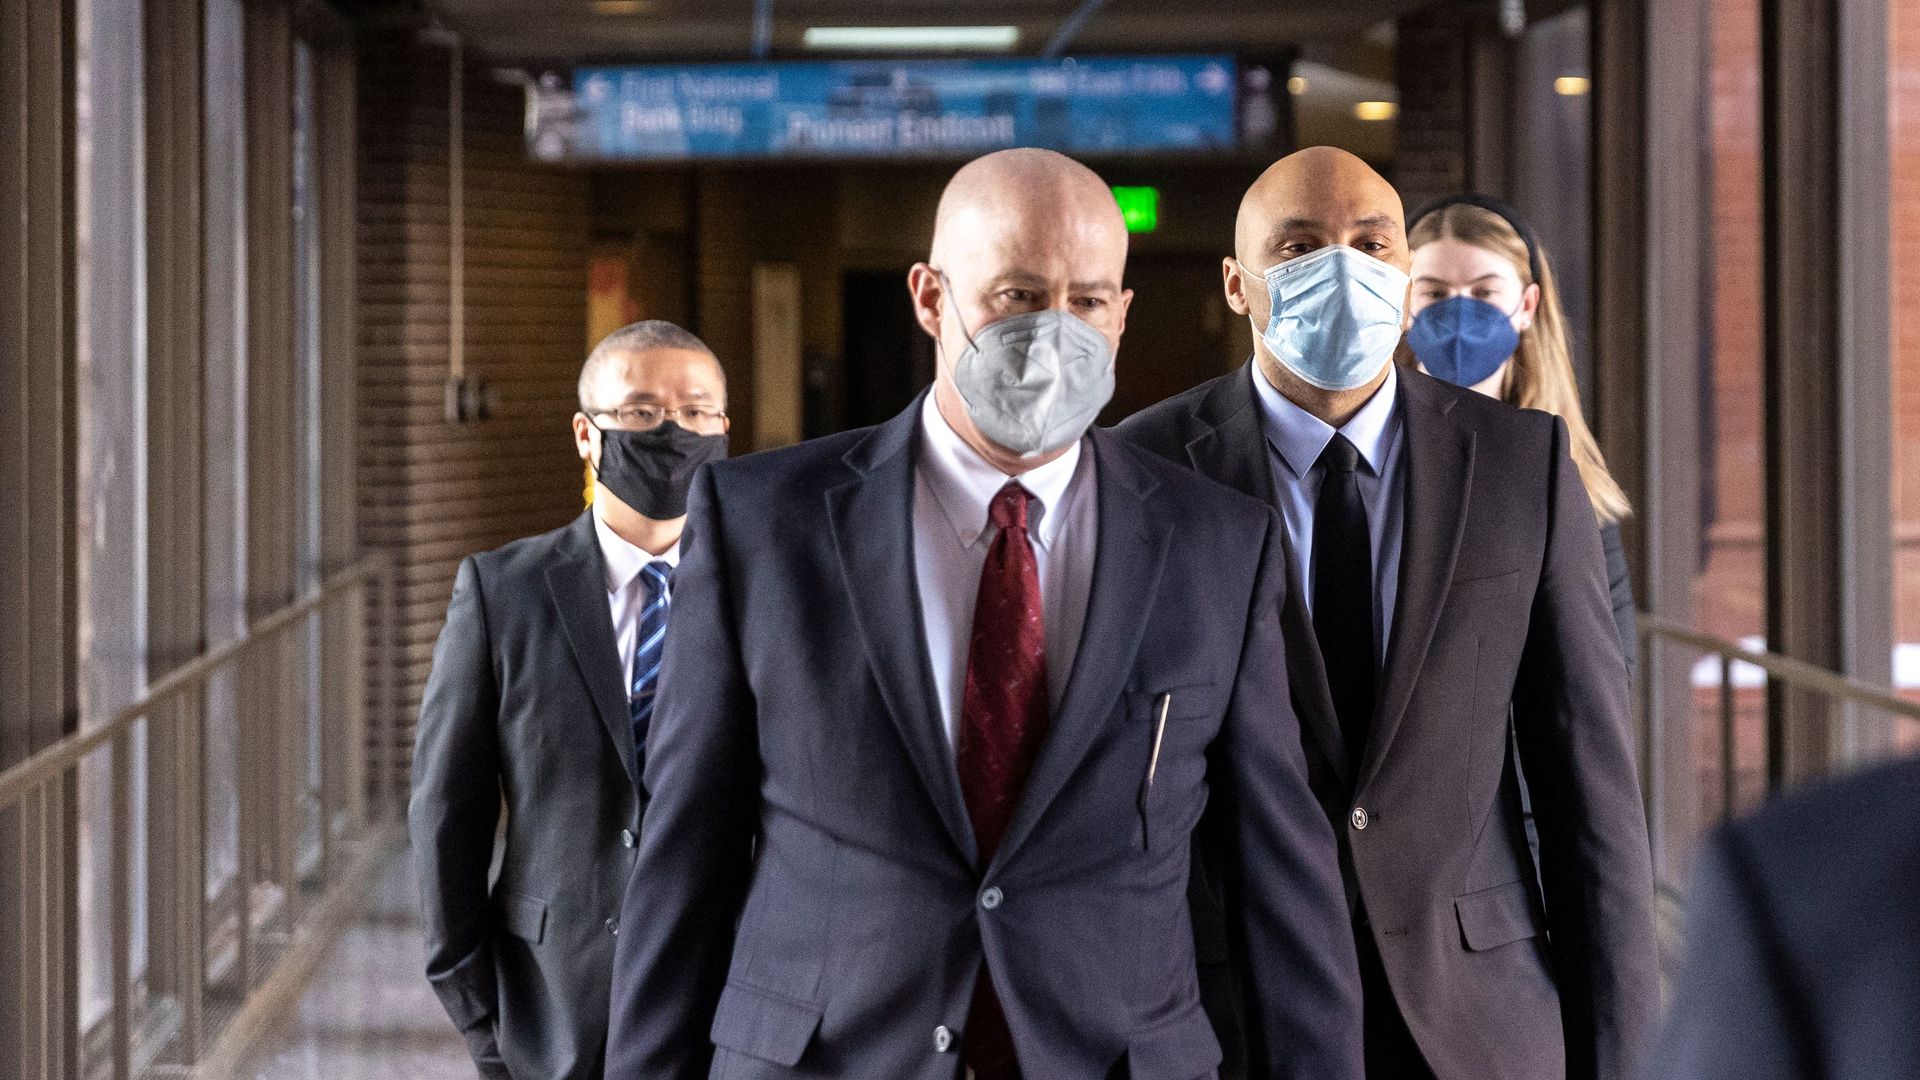 Photo of three masked men and a masked woman in the back walking down a hallway